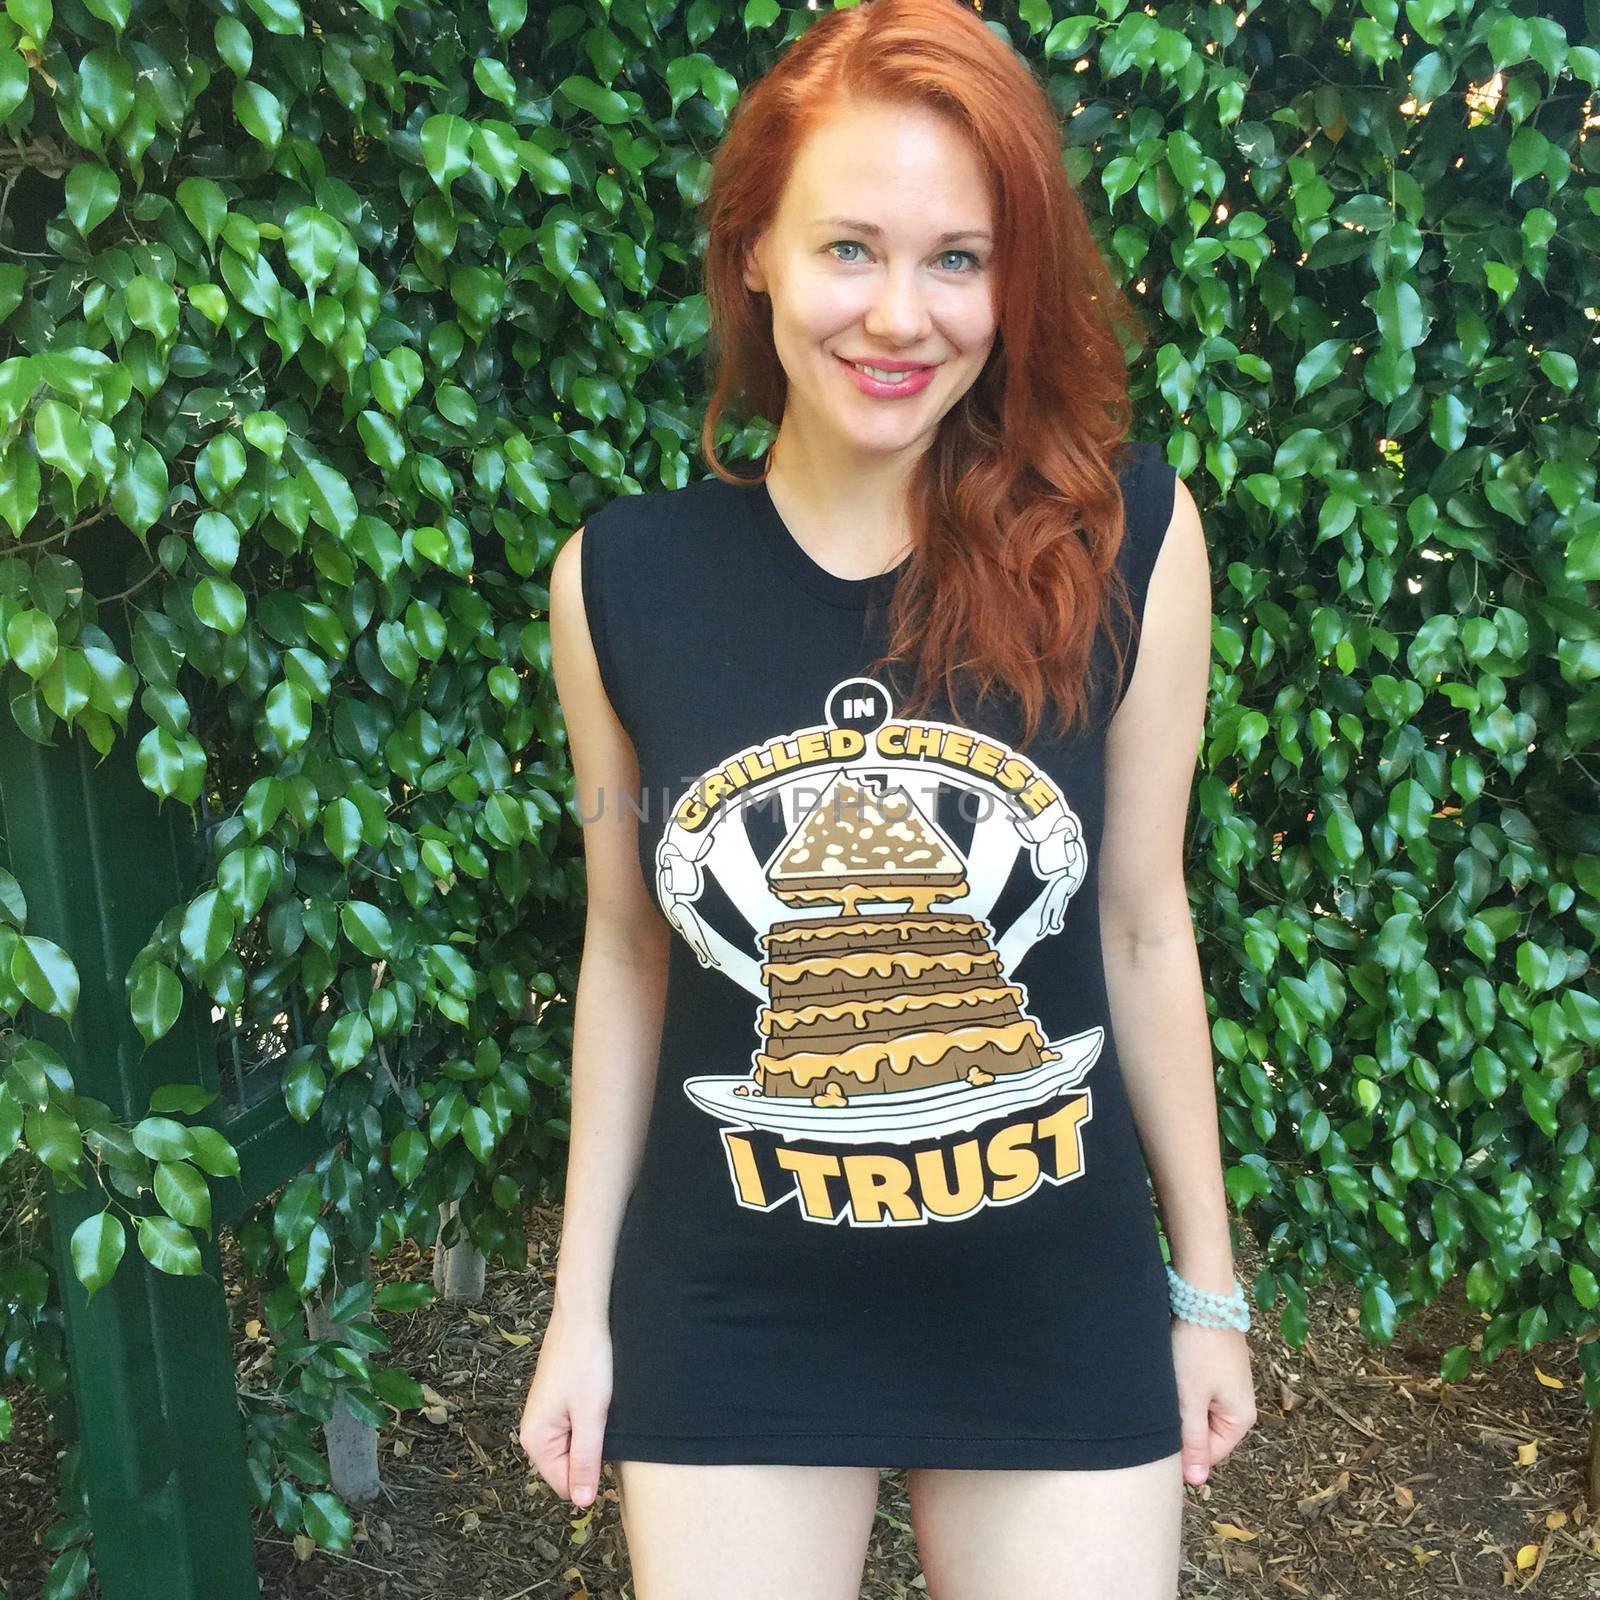 Maitland Ward Looking Cute in her Grilled Cheese T-Shirt, Private Location, Los Angeles, CA 09-03-15/ImageCollect by ImageCollect